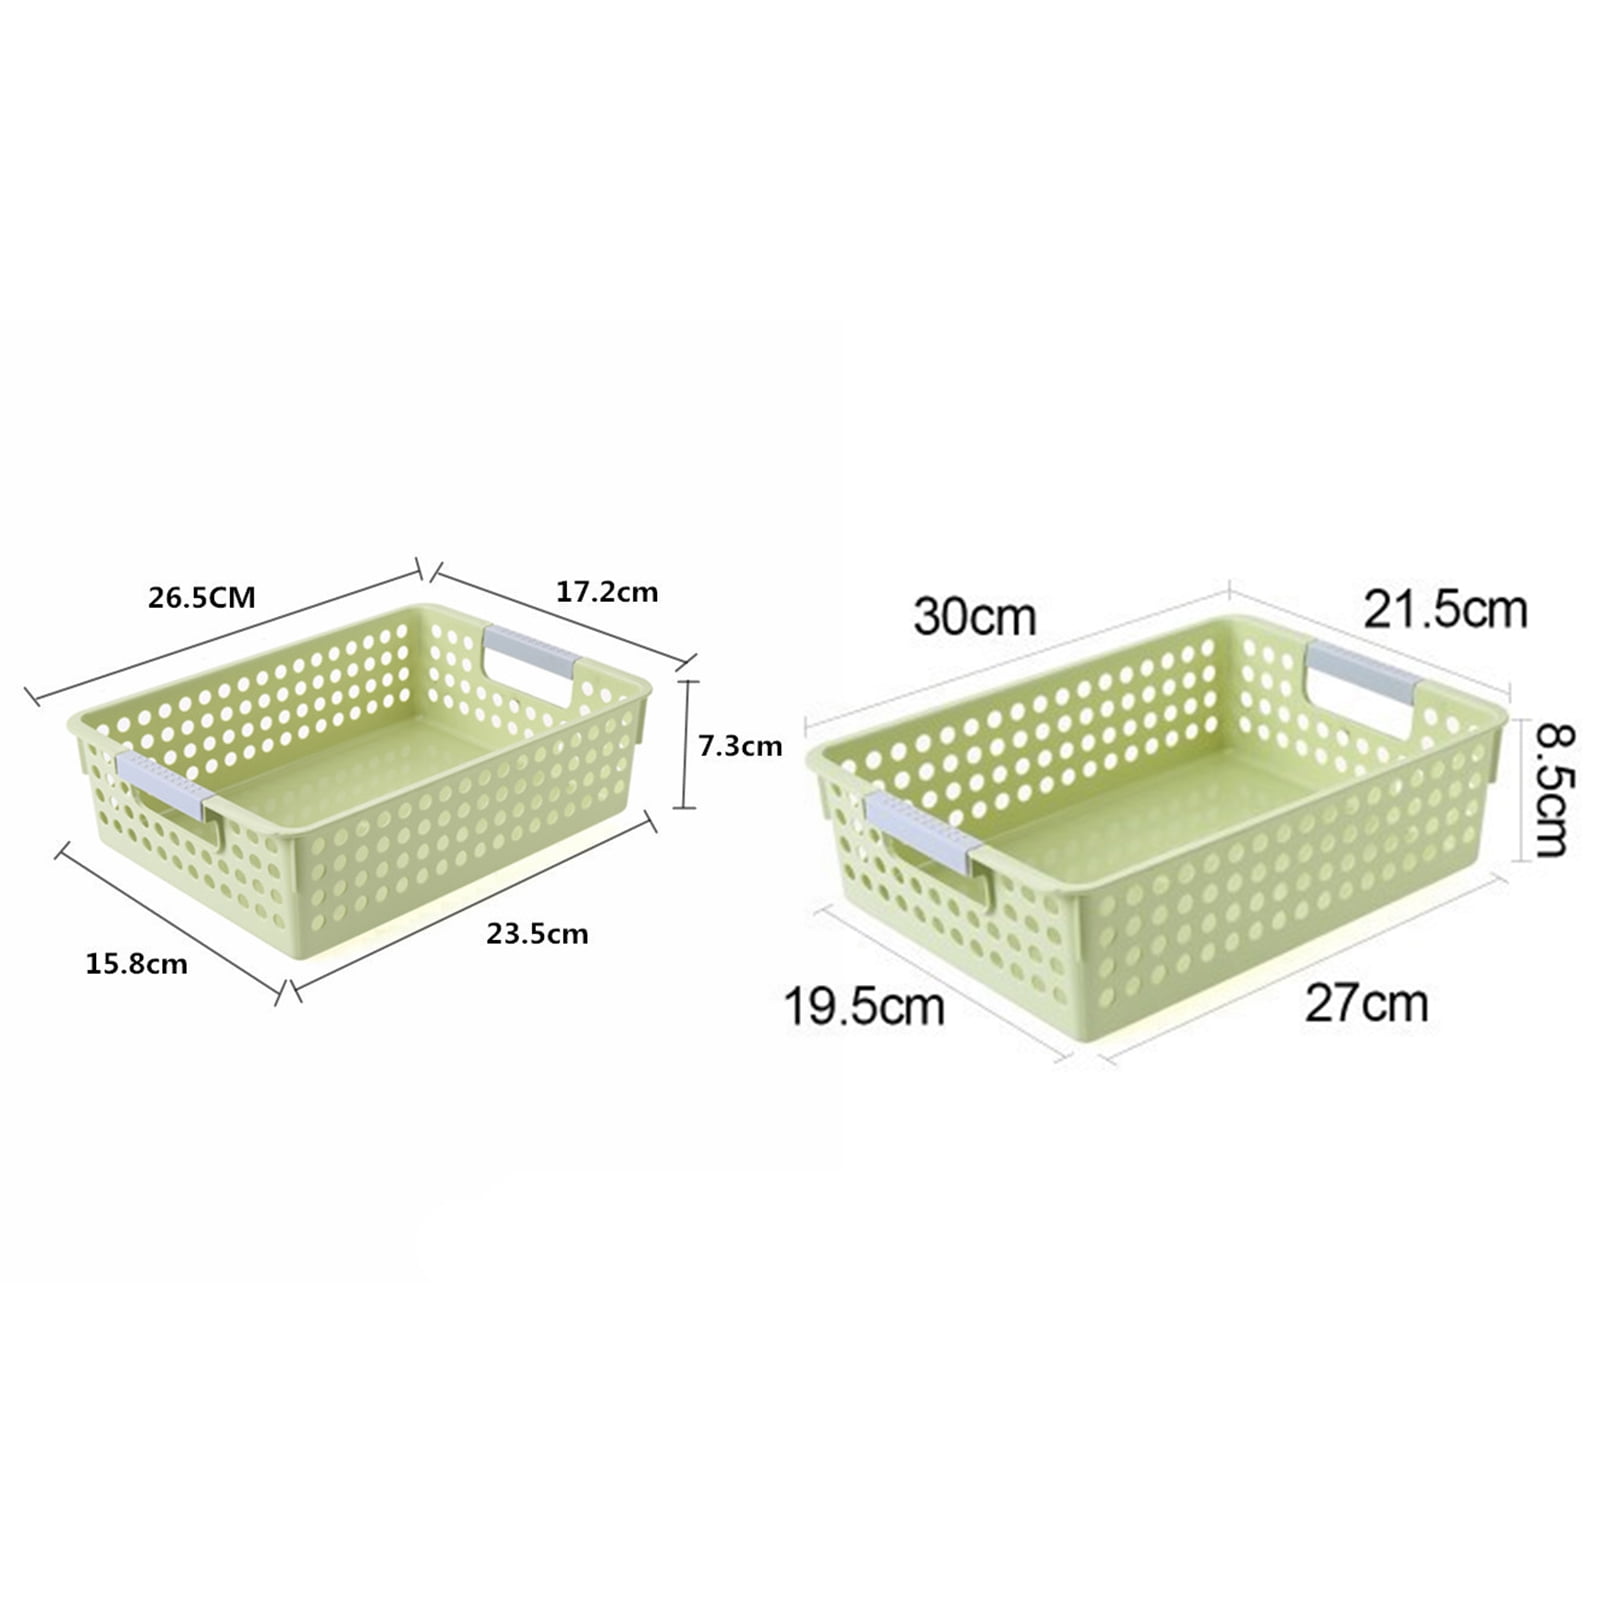 Cheers US Plastic Storage Baskets - Small Pantry Organizer Basket Bins - Household Organizers with Cutout Handles for Kitchen Organization